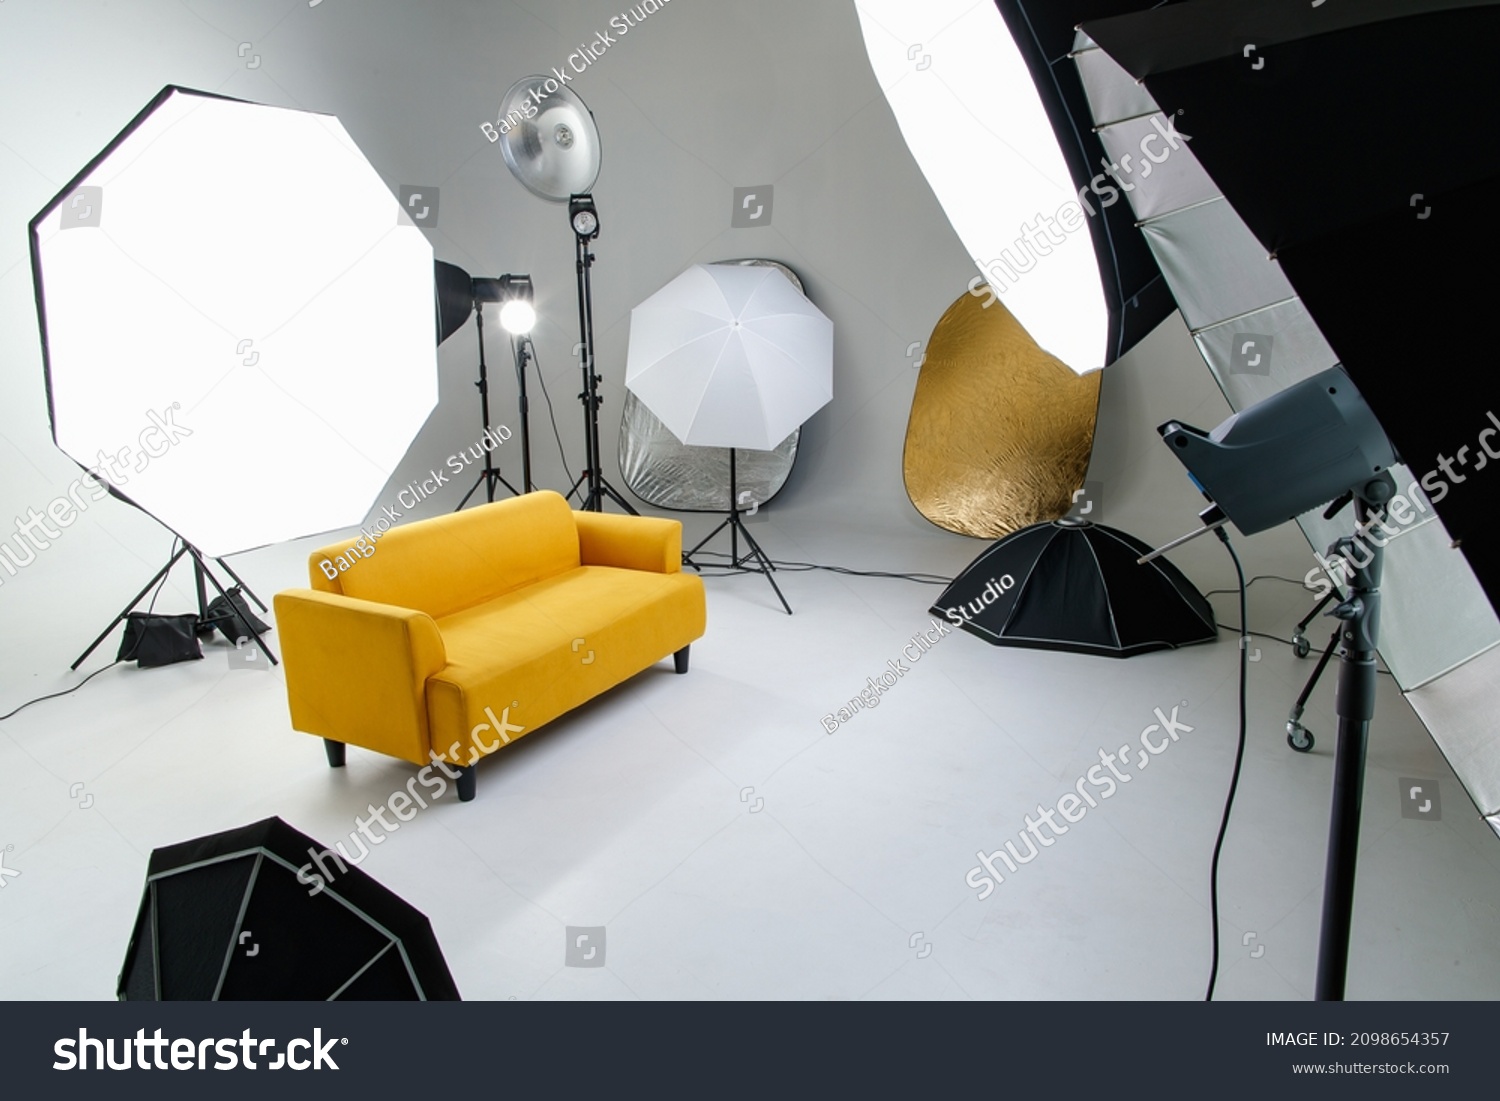 Studio shot fashion backstage photographing shooting set with yellow cozy sofa couch and photography equipment softbox flash strobe spotlight tripods reflector umbrella on white backdrop background. #2098654357